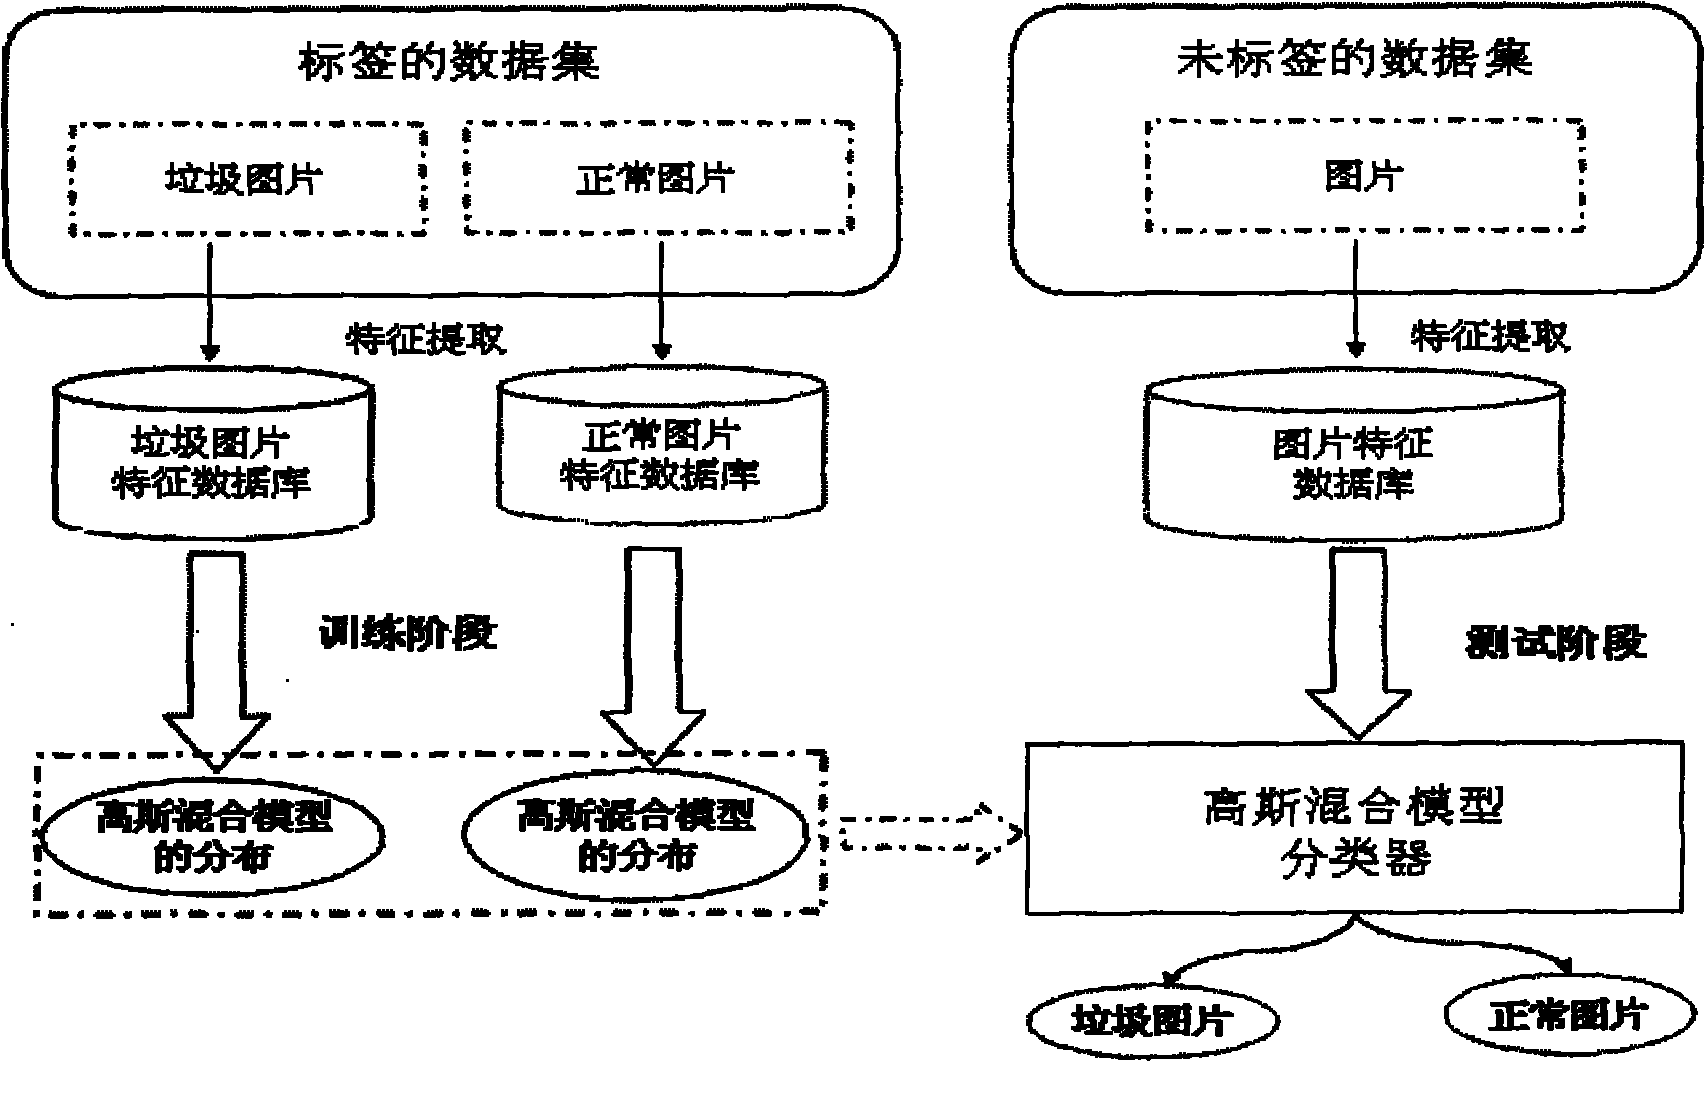 Method for detecting image-based spam by utilizing image local invariant feature